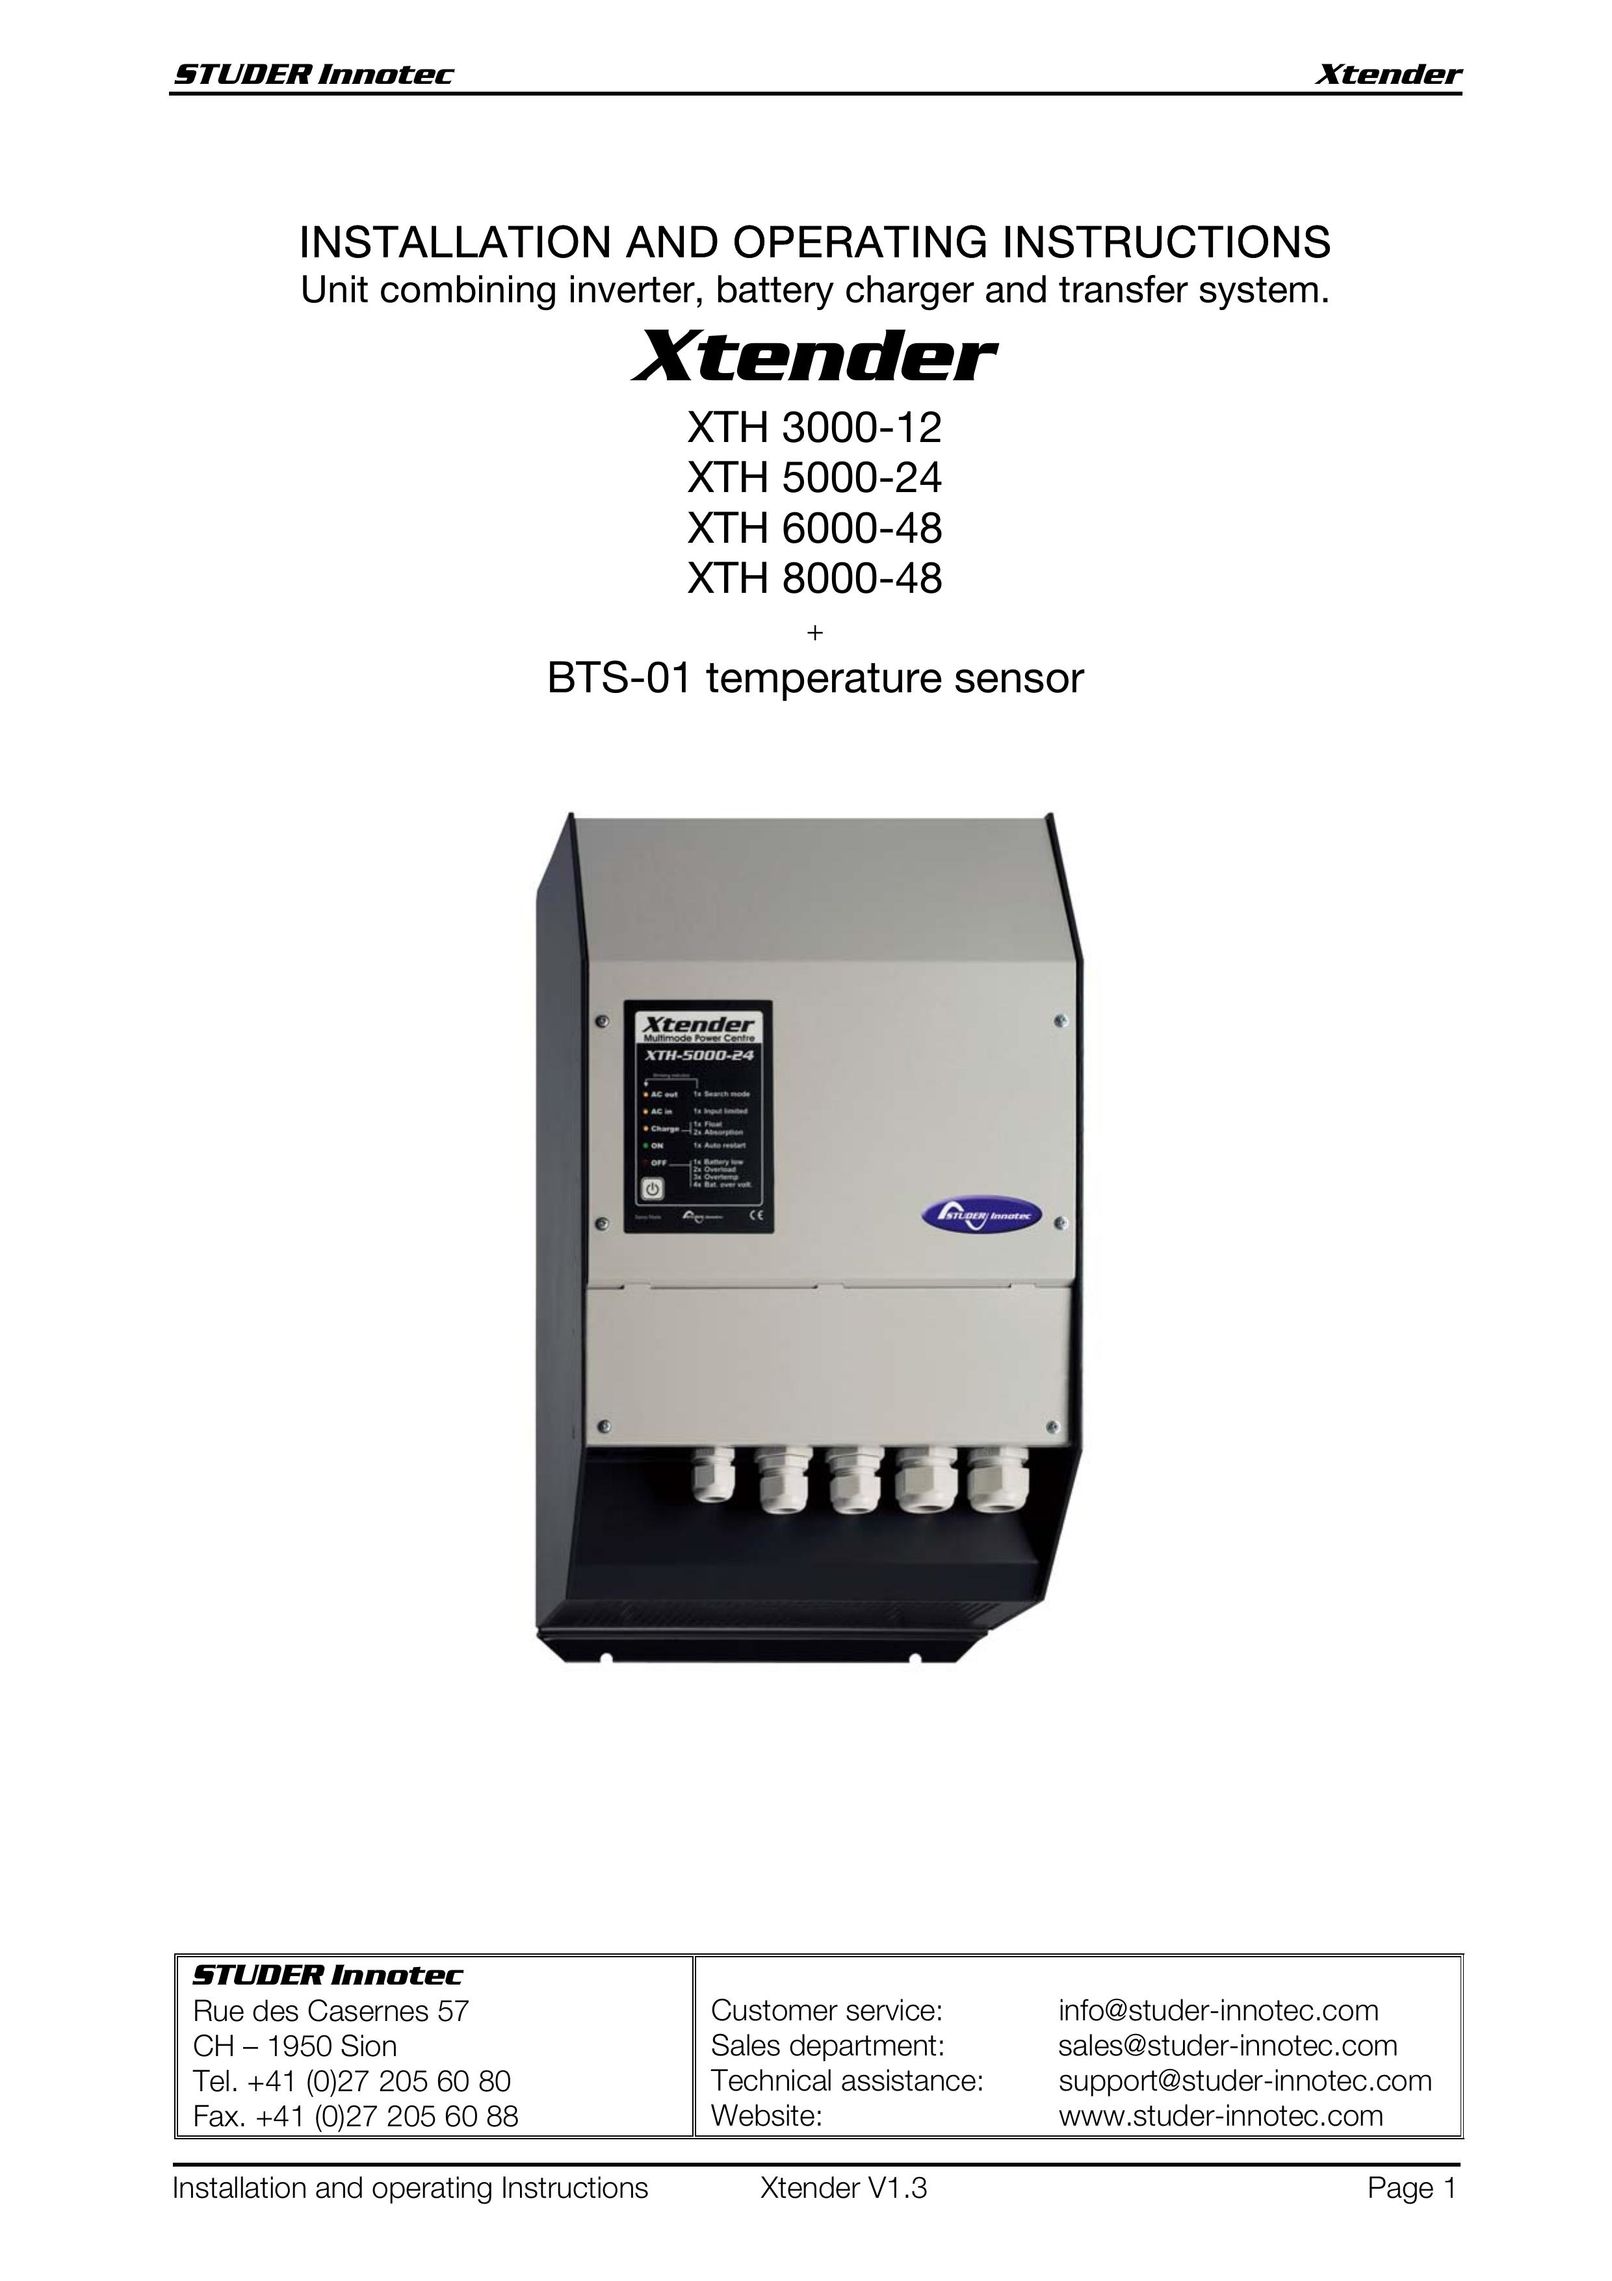 Studer Innotec XTH 5000-24 Battery Charger User Manual